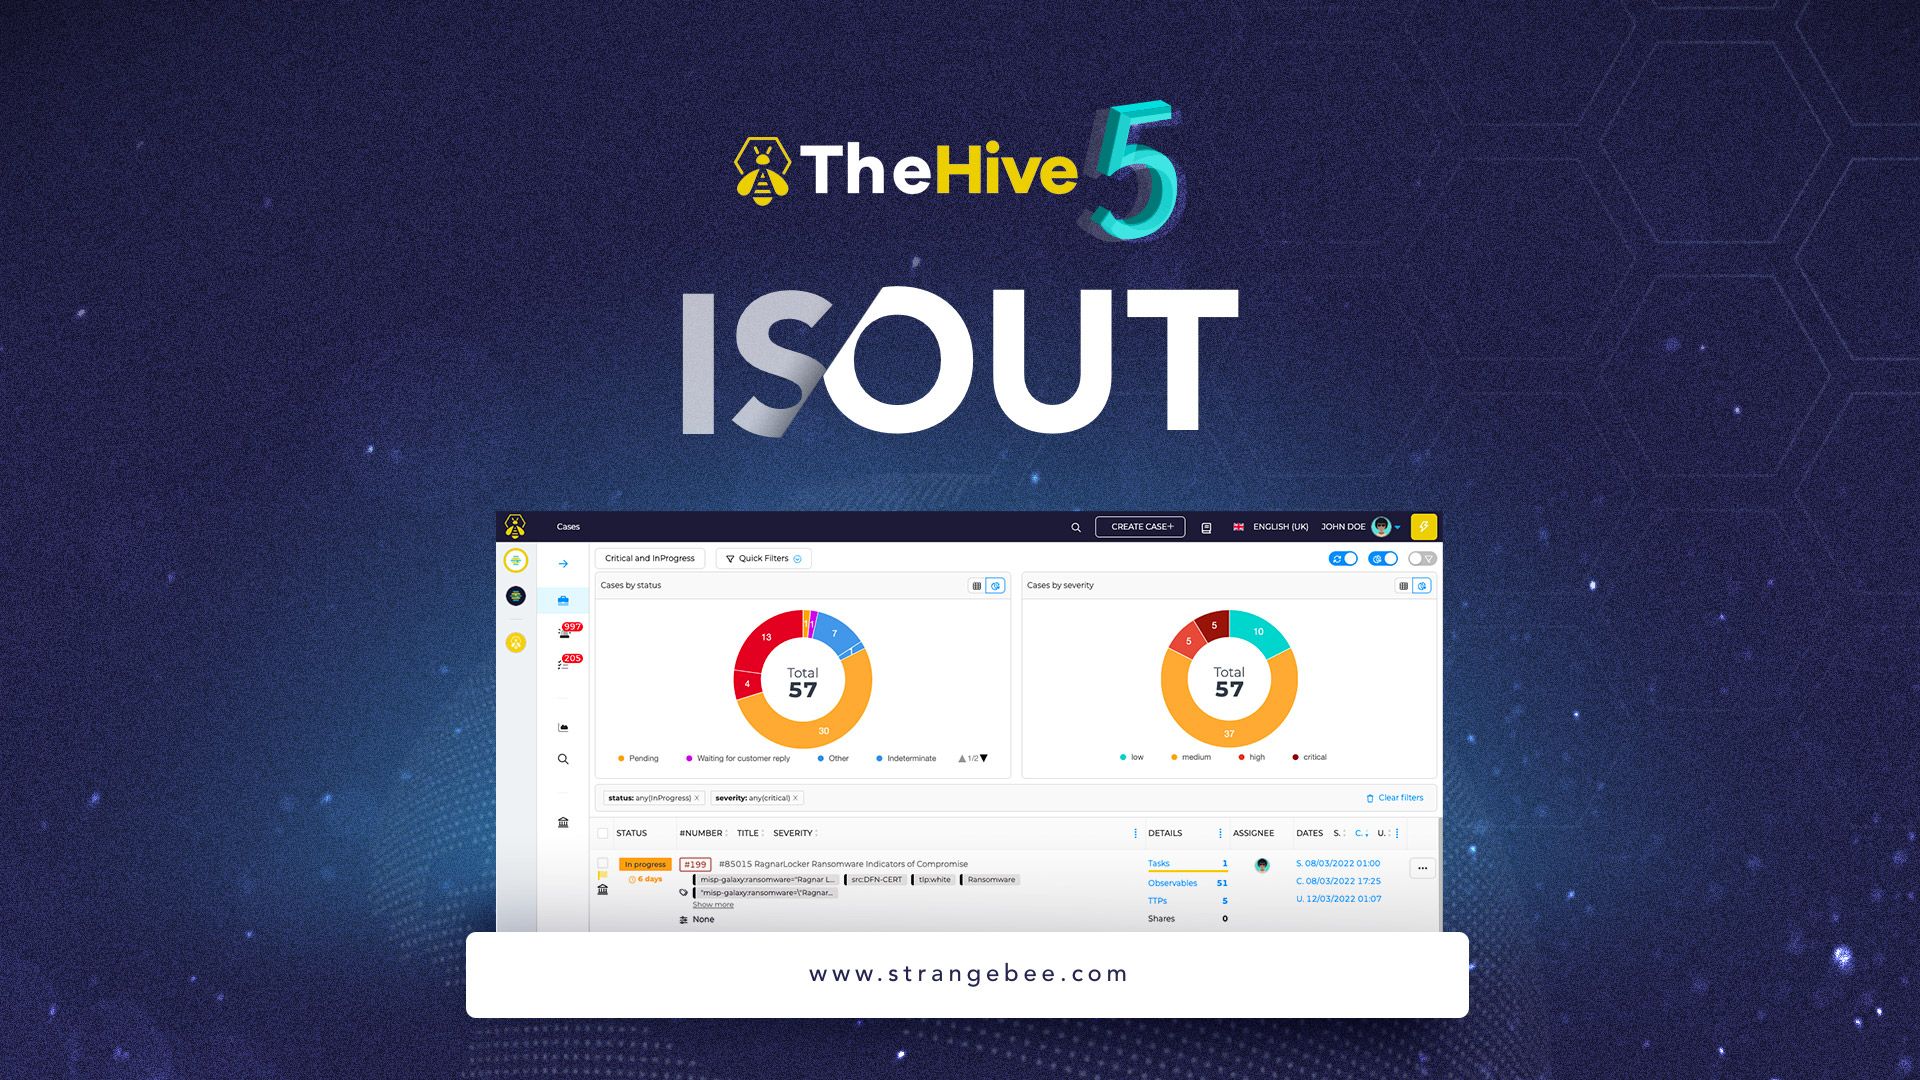 TheHive 5.0 is now available